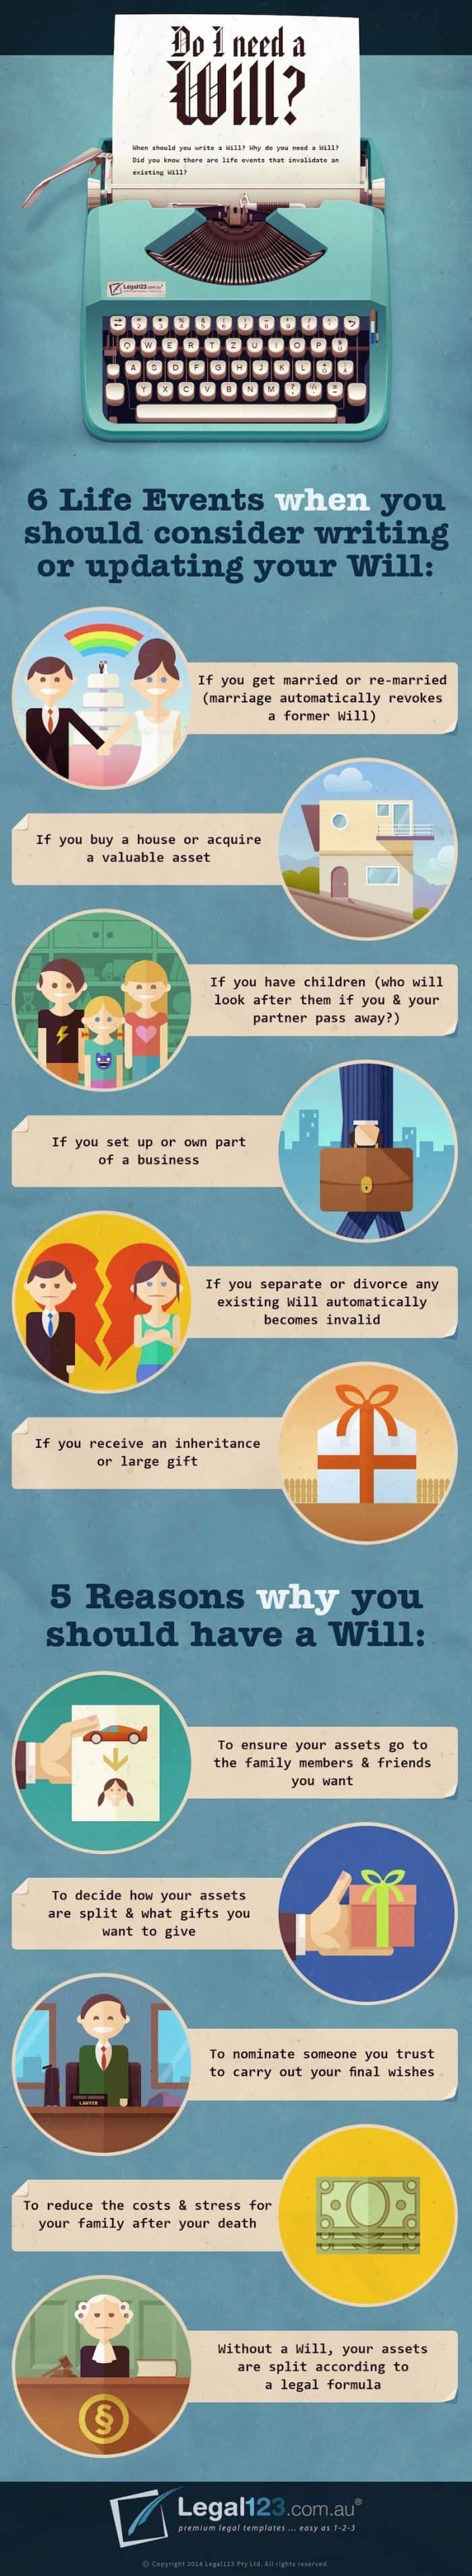 How to Tell if You Need a Will Infographic